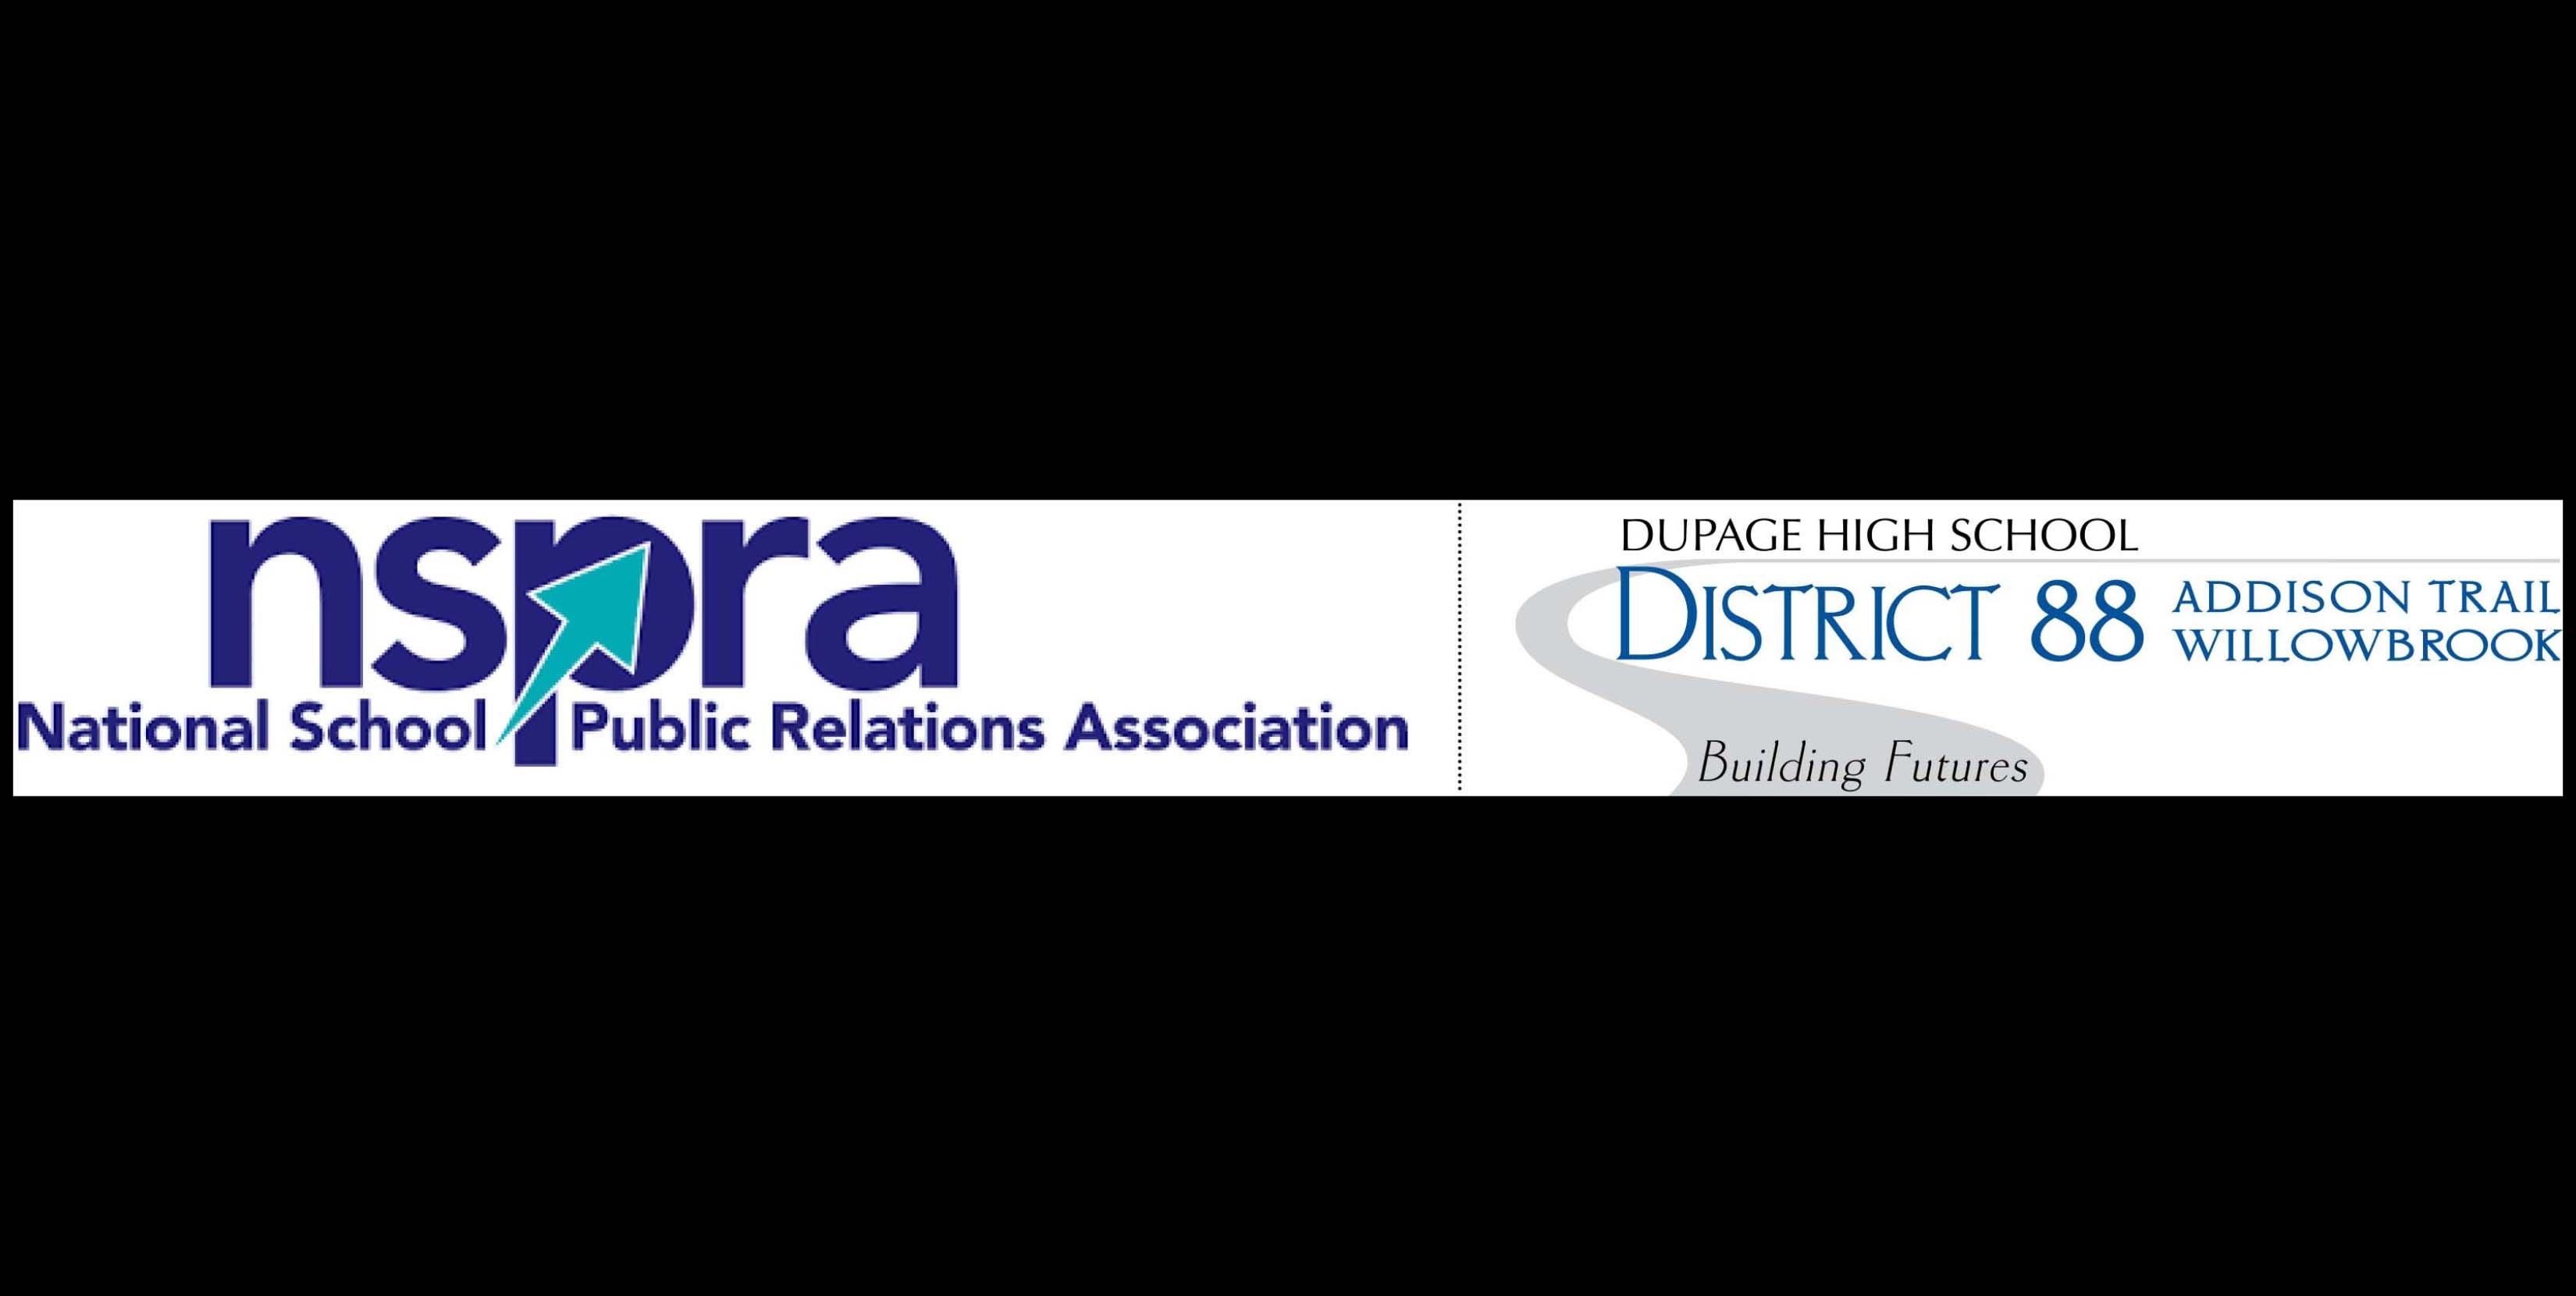 District 88 earns four national-level awards from National School Public Relations Association (NSPRA)